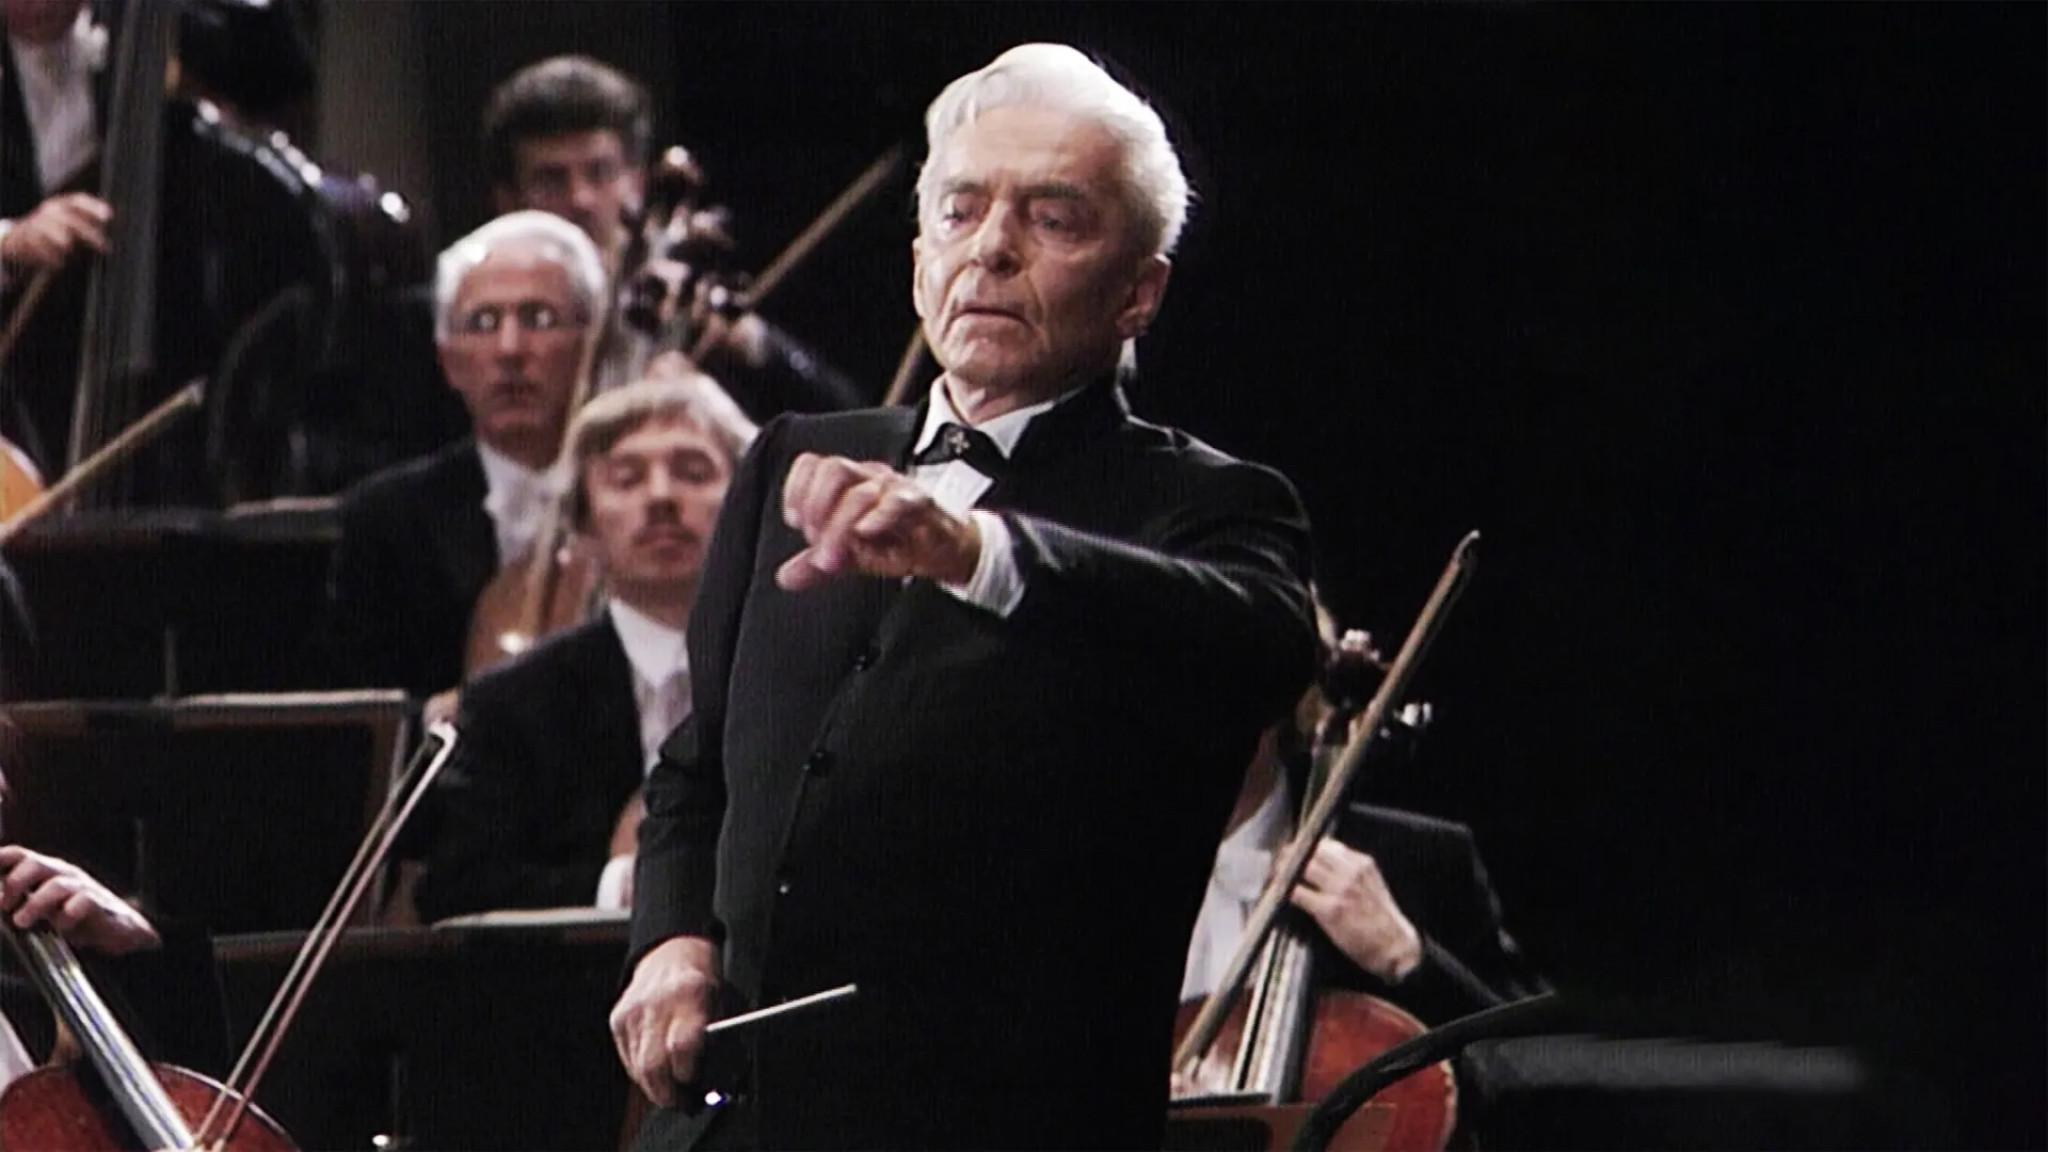 Karajan conducts the New Year's Eve Concert 1985